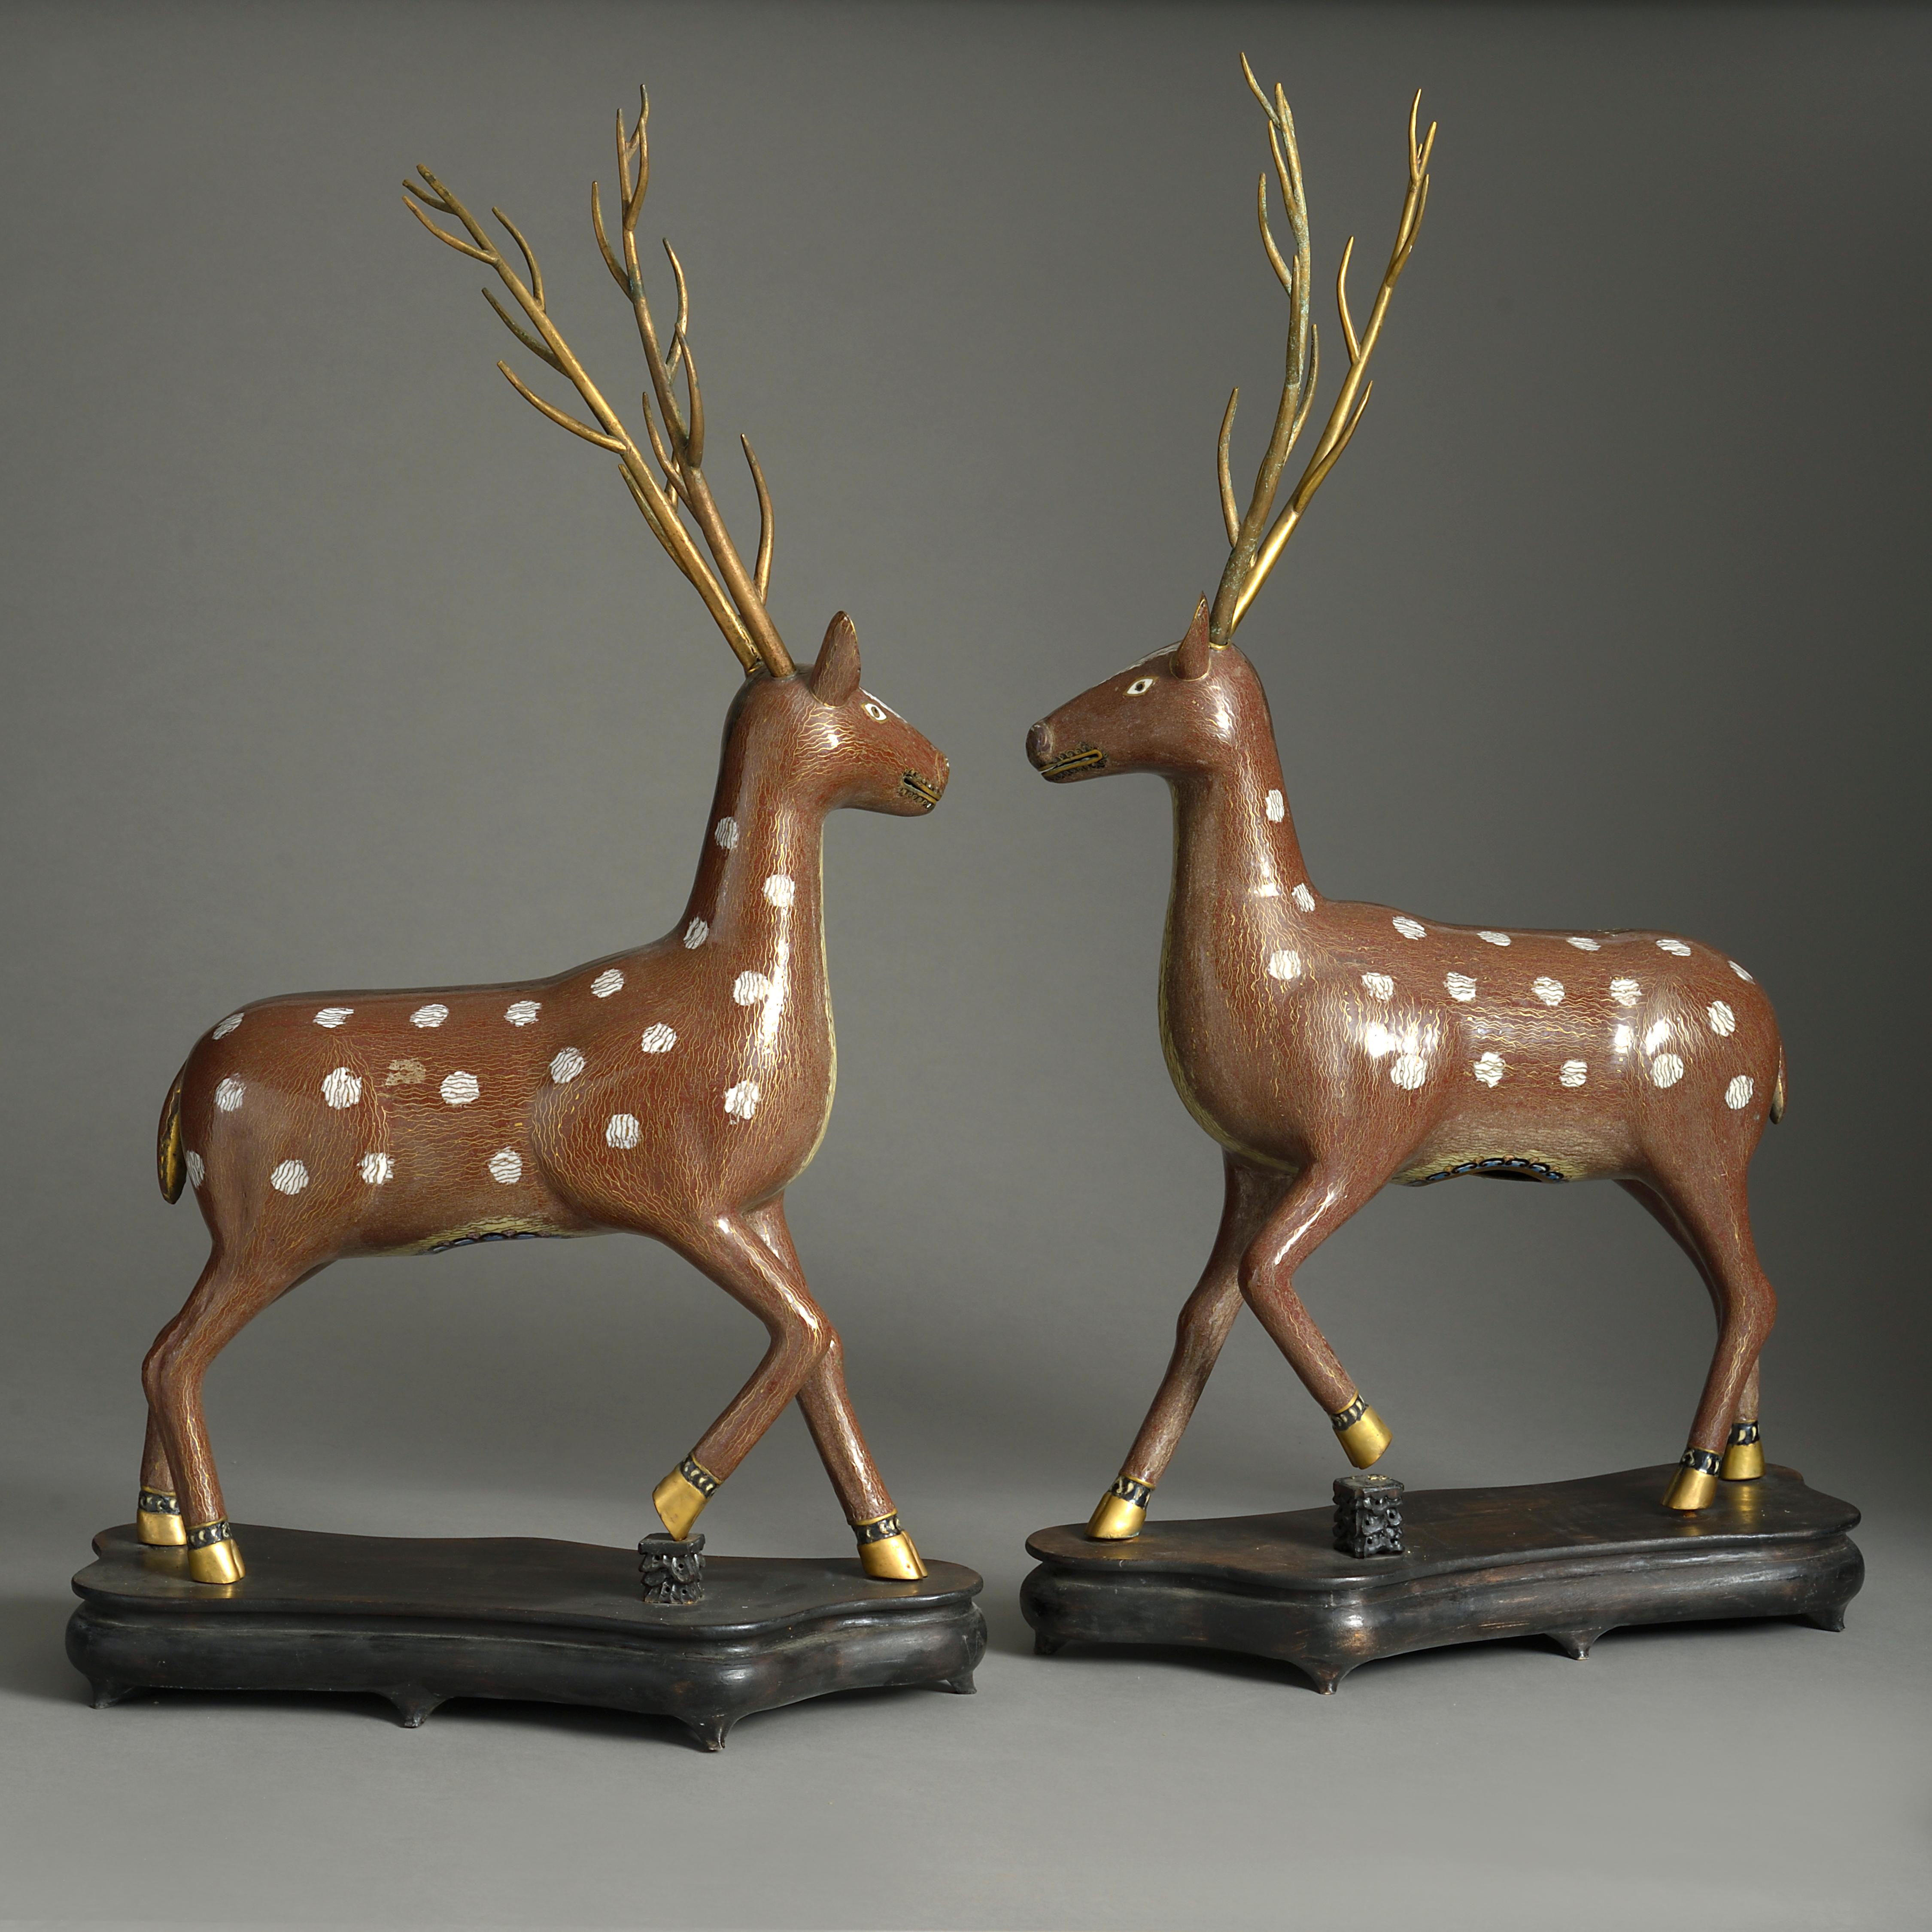 A pair of finely modelled mid-20th century cloisonné stags, having gilt metal antlers, the bodies with intricate enamel inlay, both set upon shaped ebonised wooden plinths.